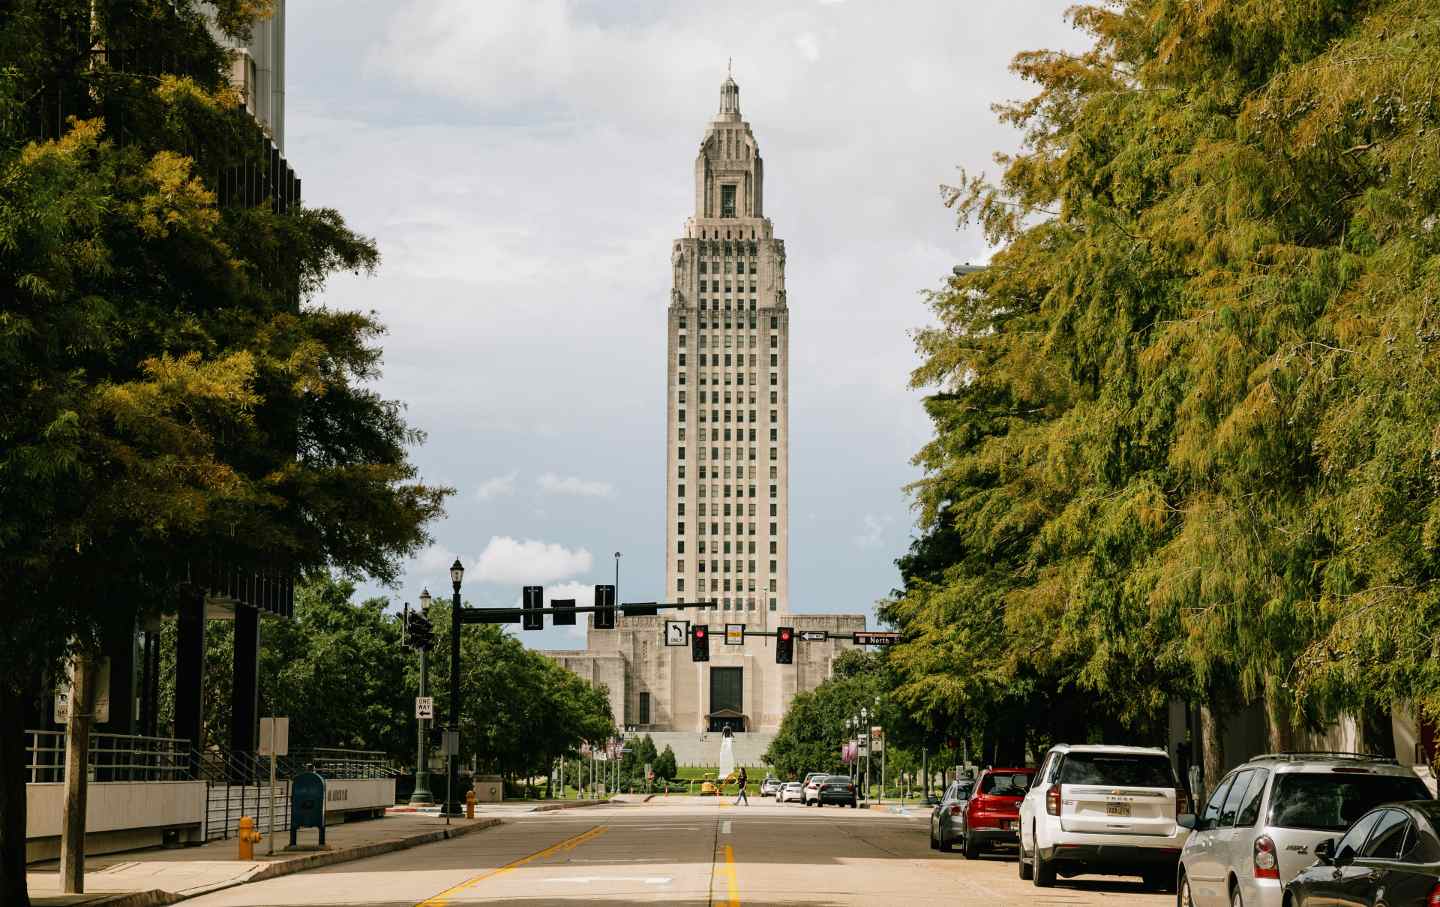 View from the tower of the Louisiana State Capitol, framed by trees.